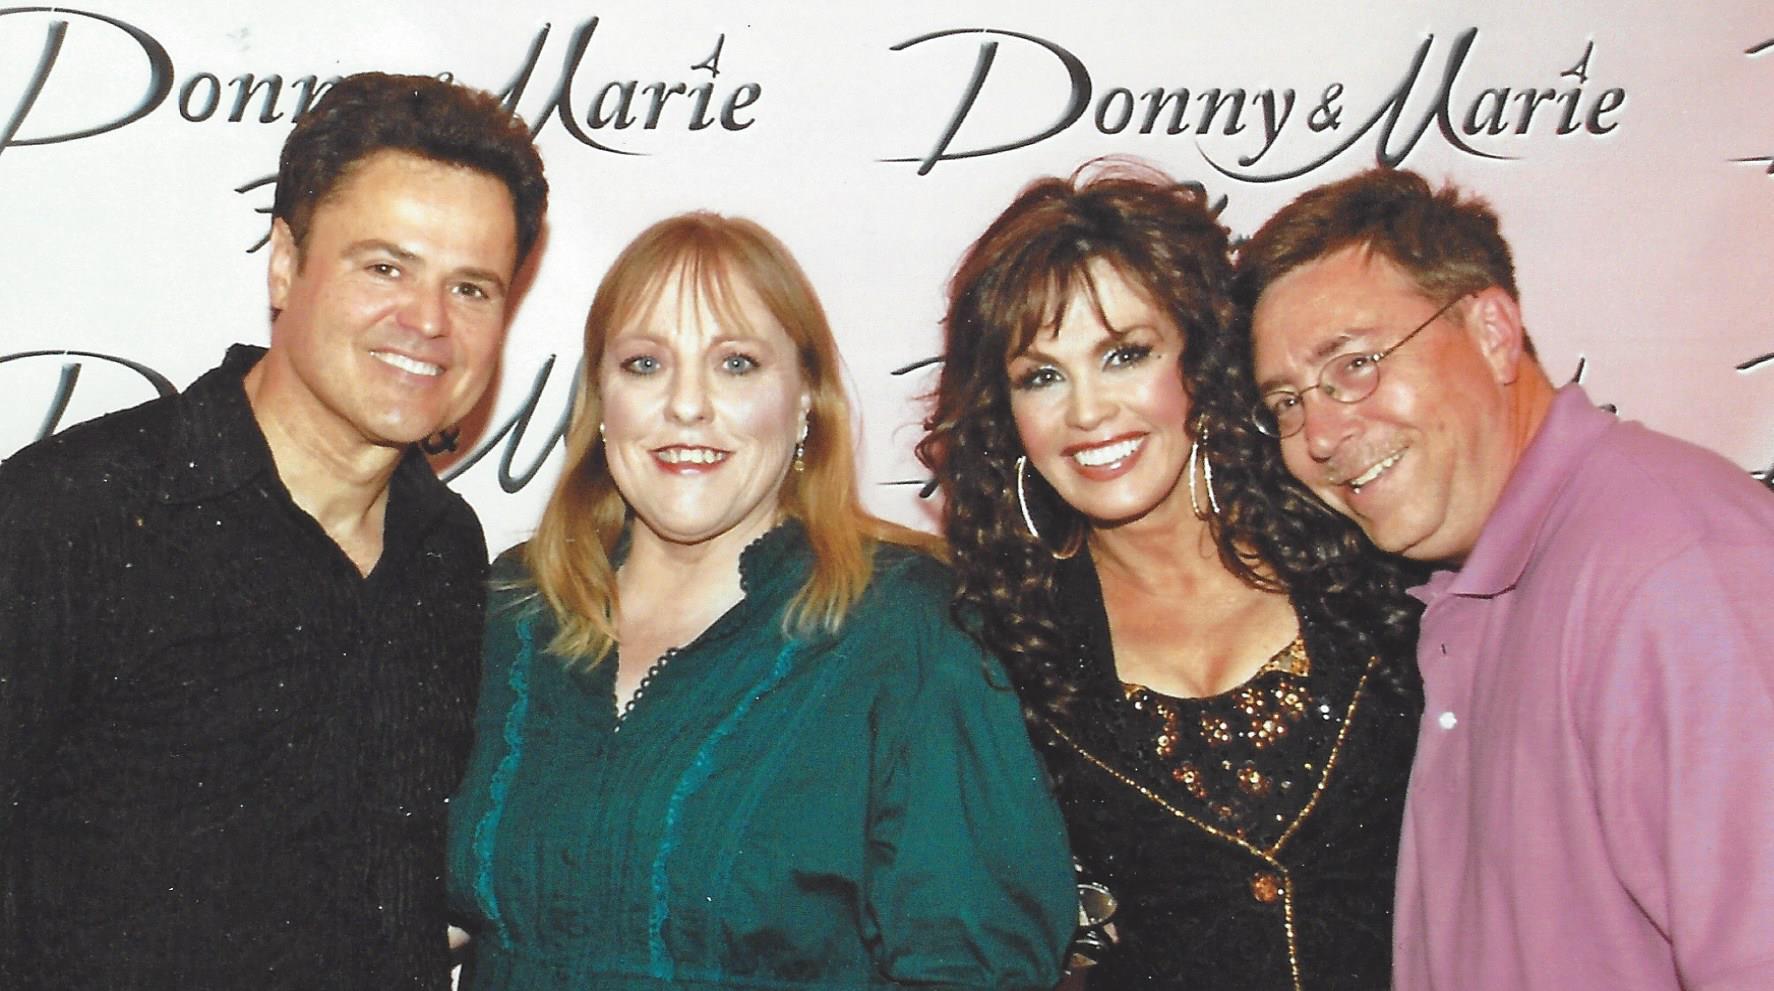 Through The Years With Donny & Marie book cover